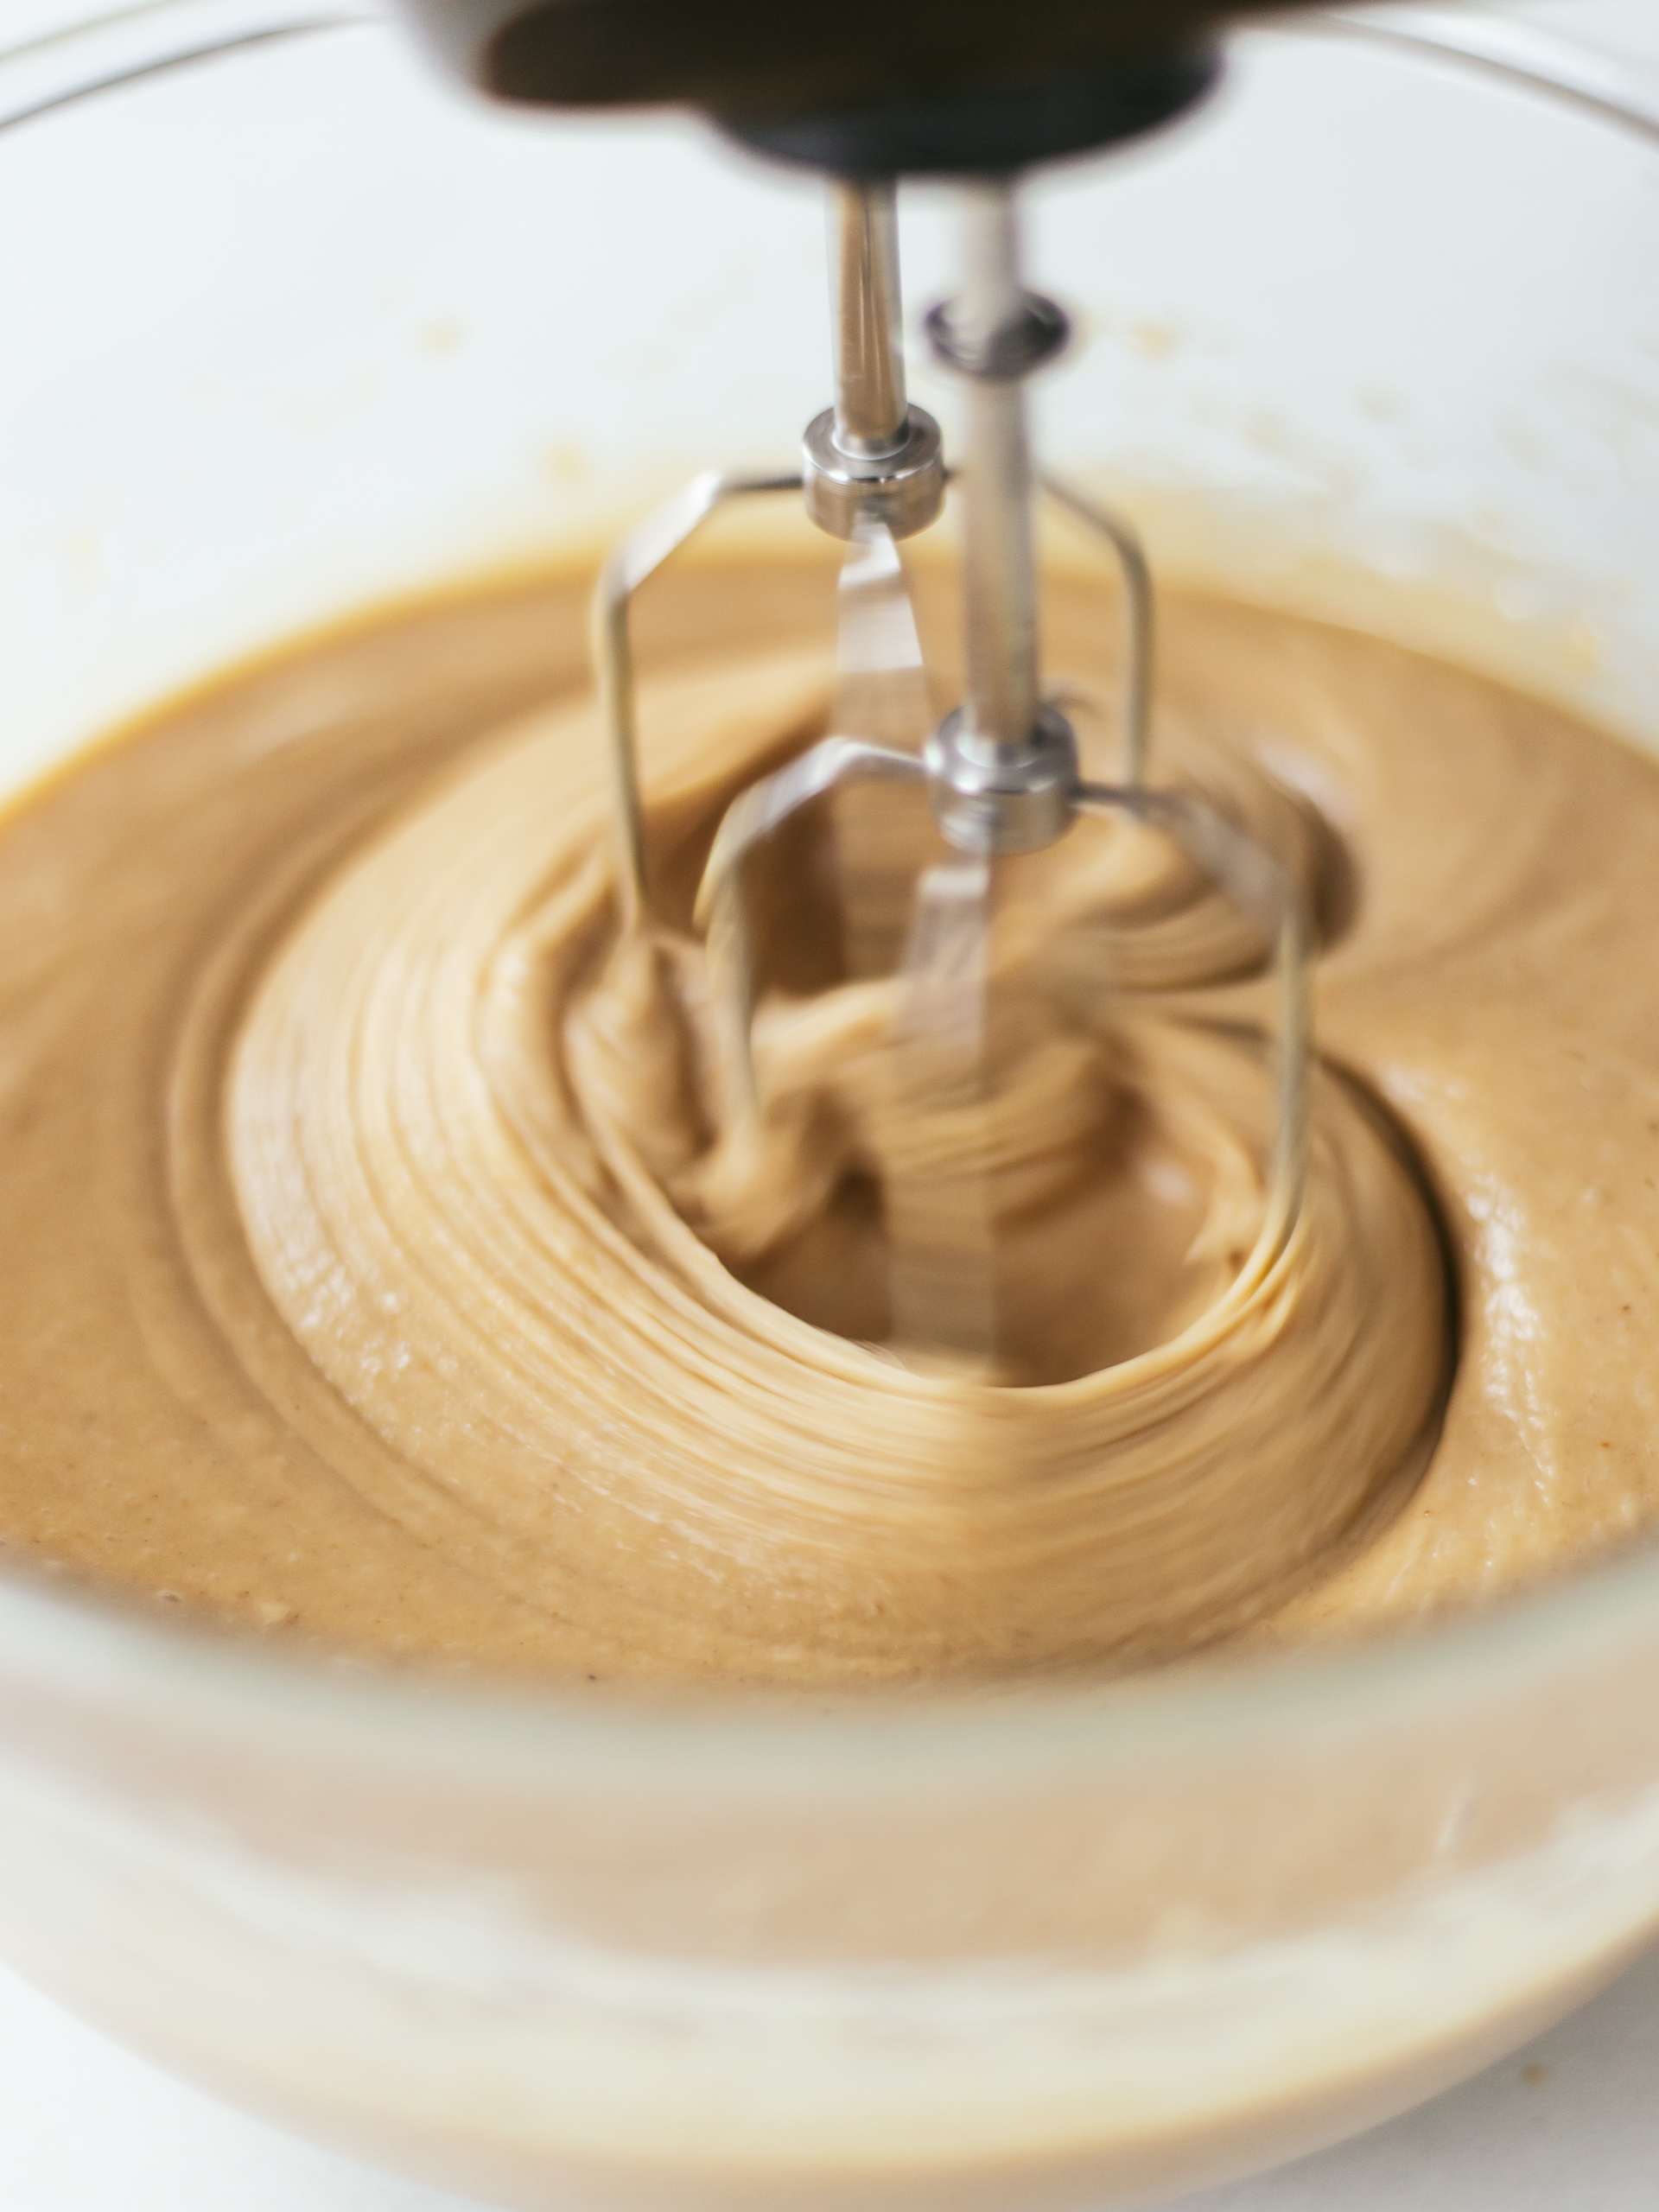 whisker mixing chai cake batter in a bowl